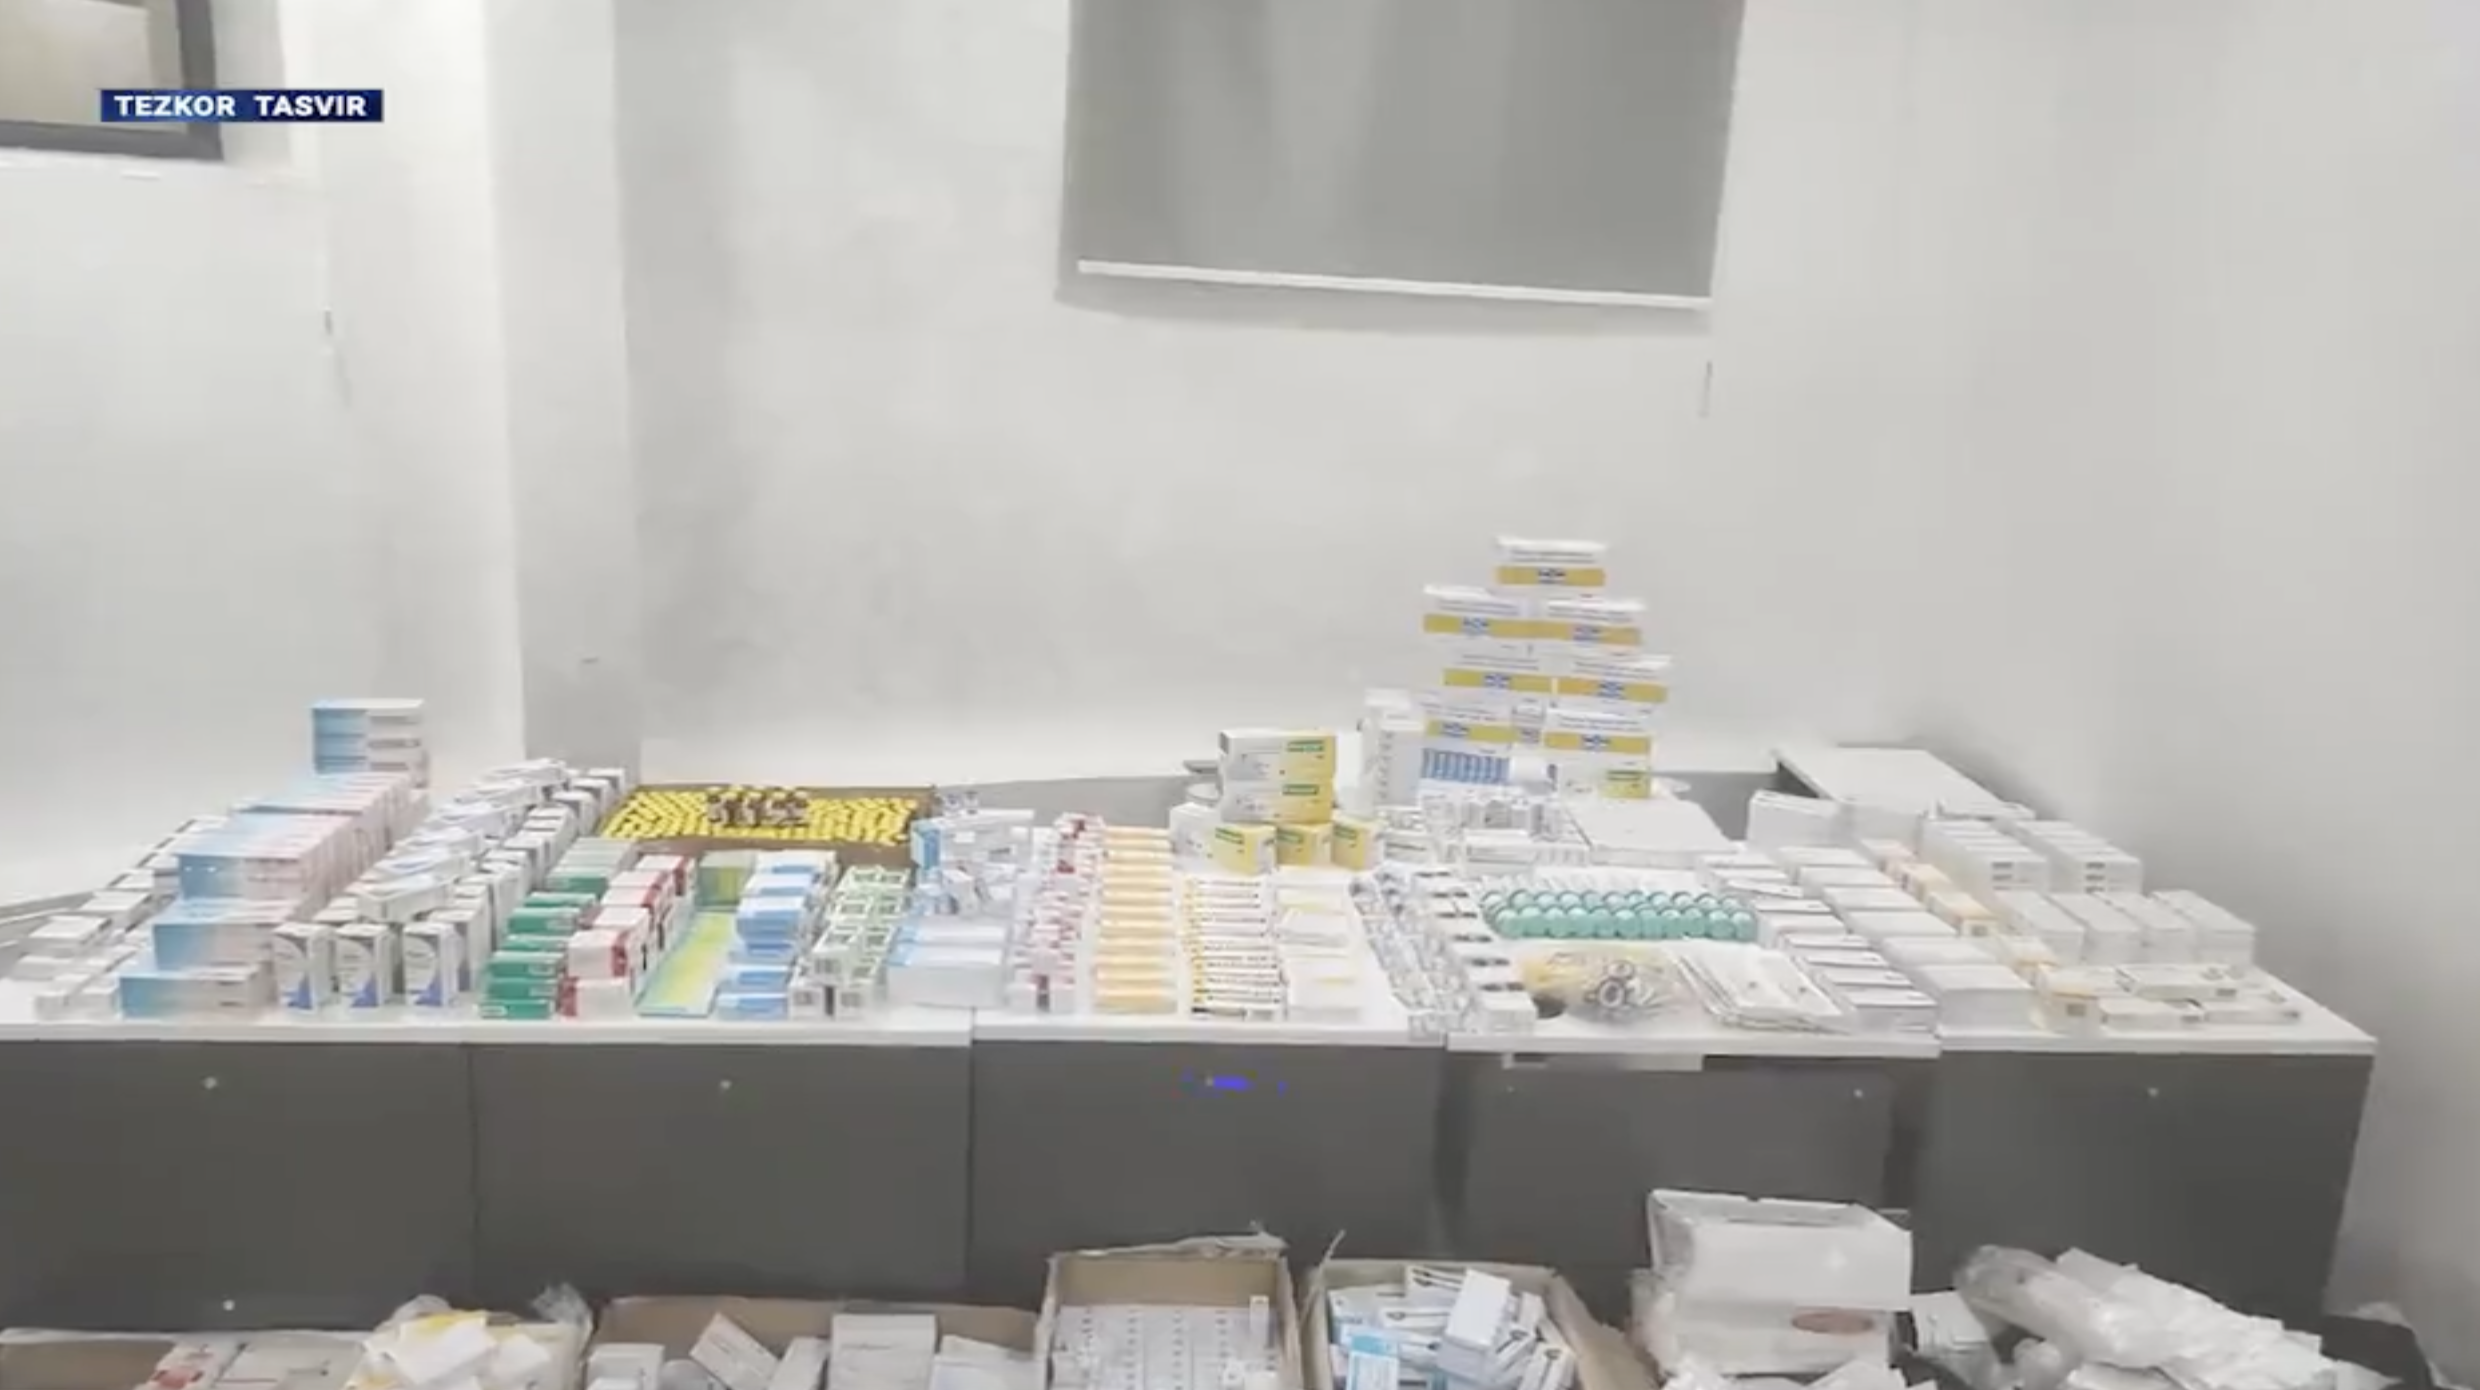 Drugs that were seized originated from India